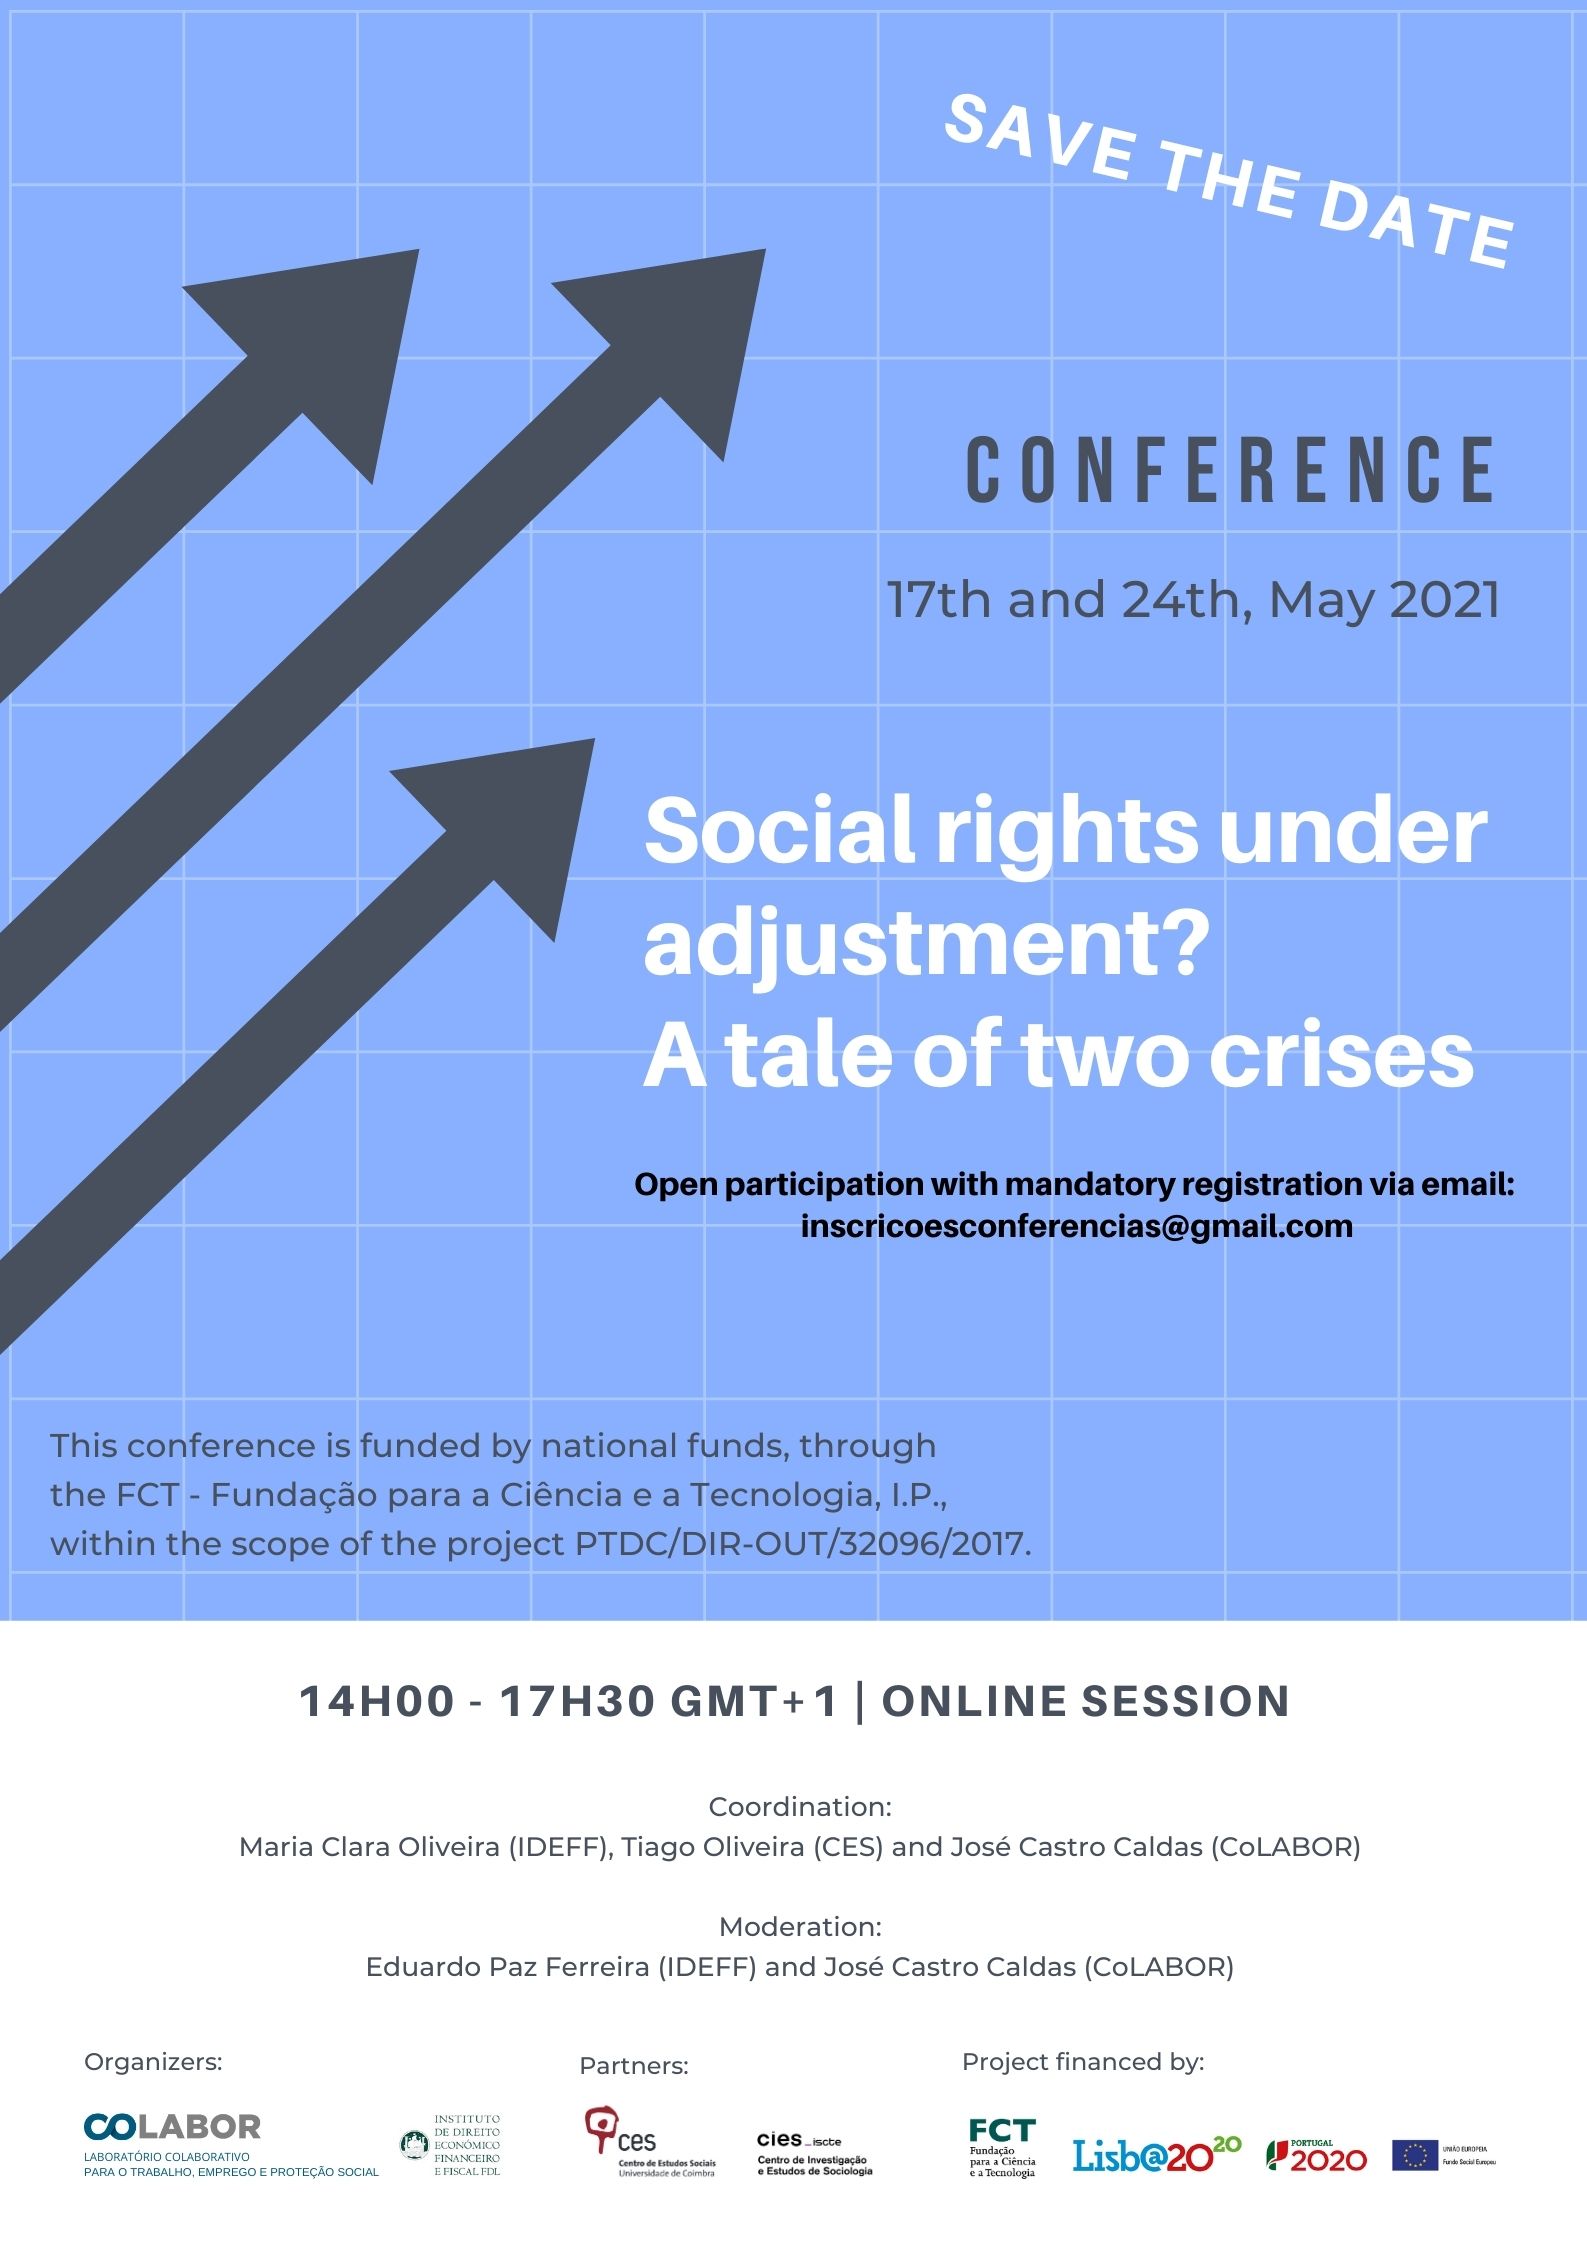 Social Rights Under Adjustment: a tale of two crises<span id="edit_34194"><script>$(function() { $('#edit_34194').load( "/myces/user/editobj.php?tipo=evento&id=34194" ); });</script></span>